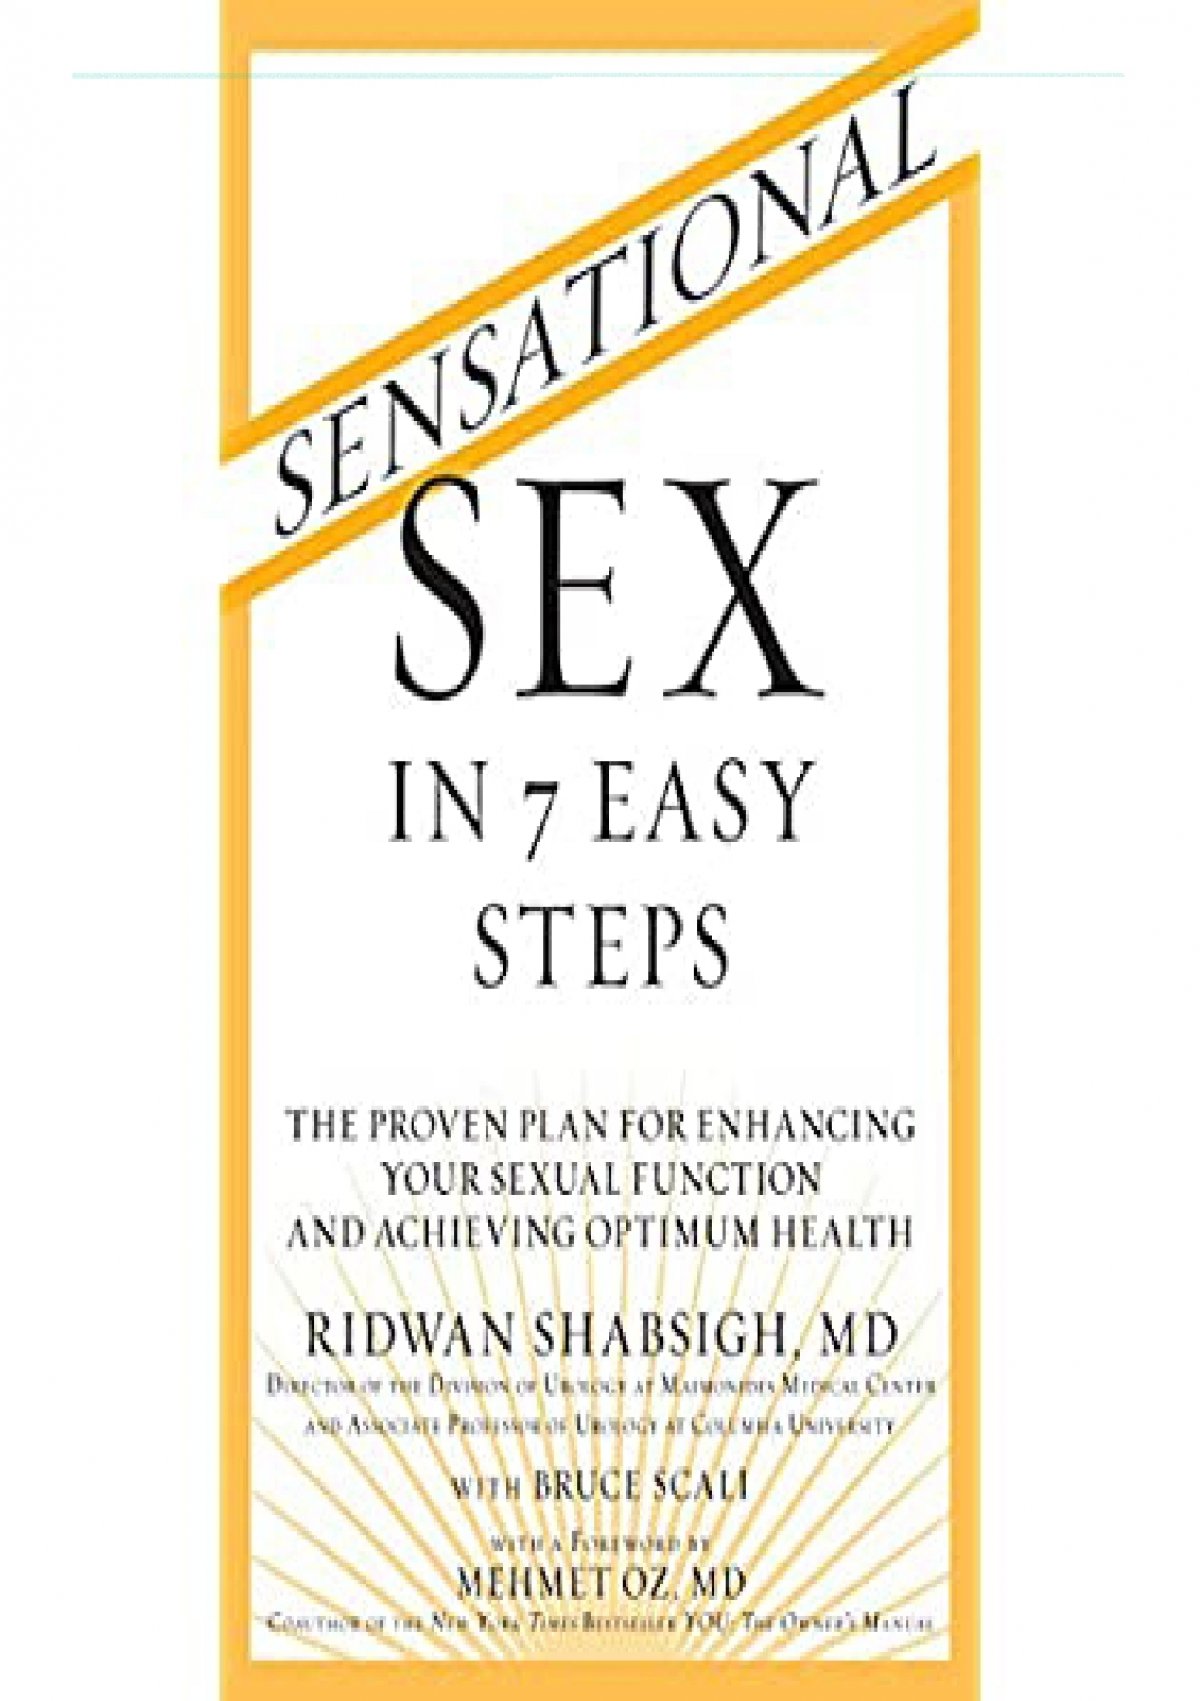 Pdf Sensational Sex In 7 Easy Steps The Proven Plan For Enhancing Your Sexual Function And 9362